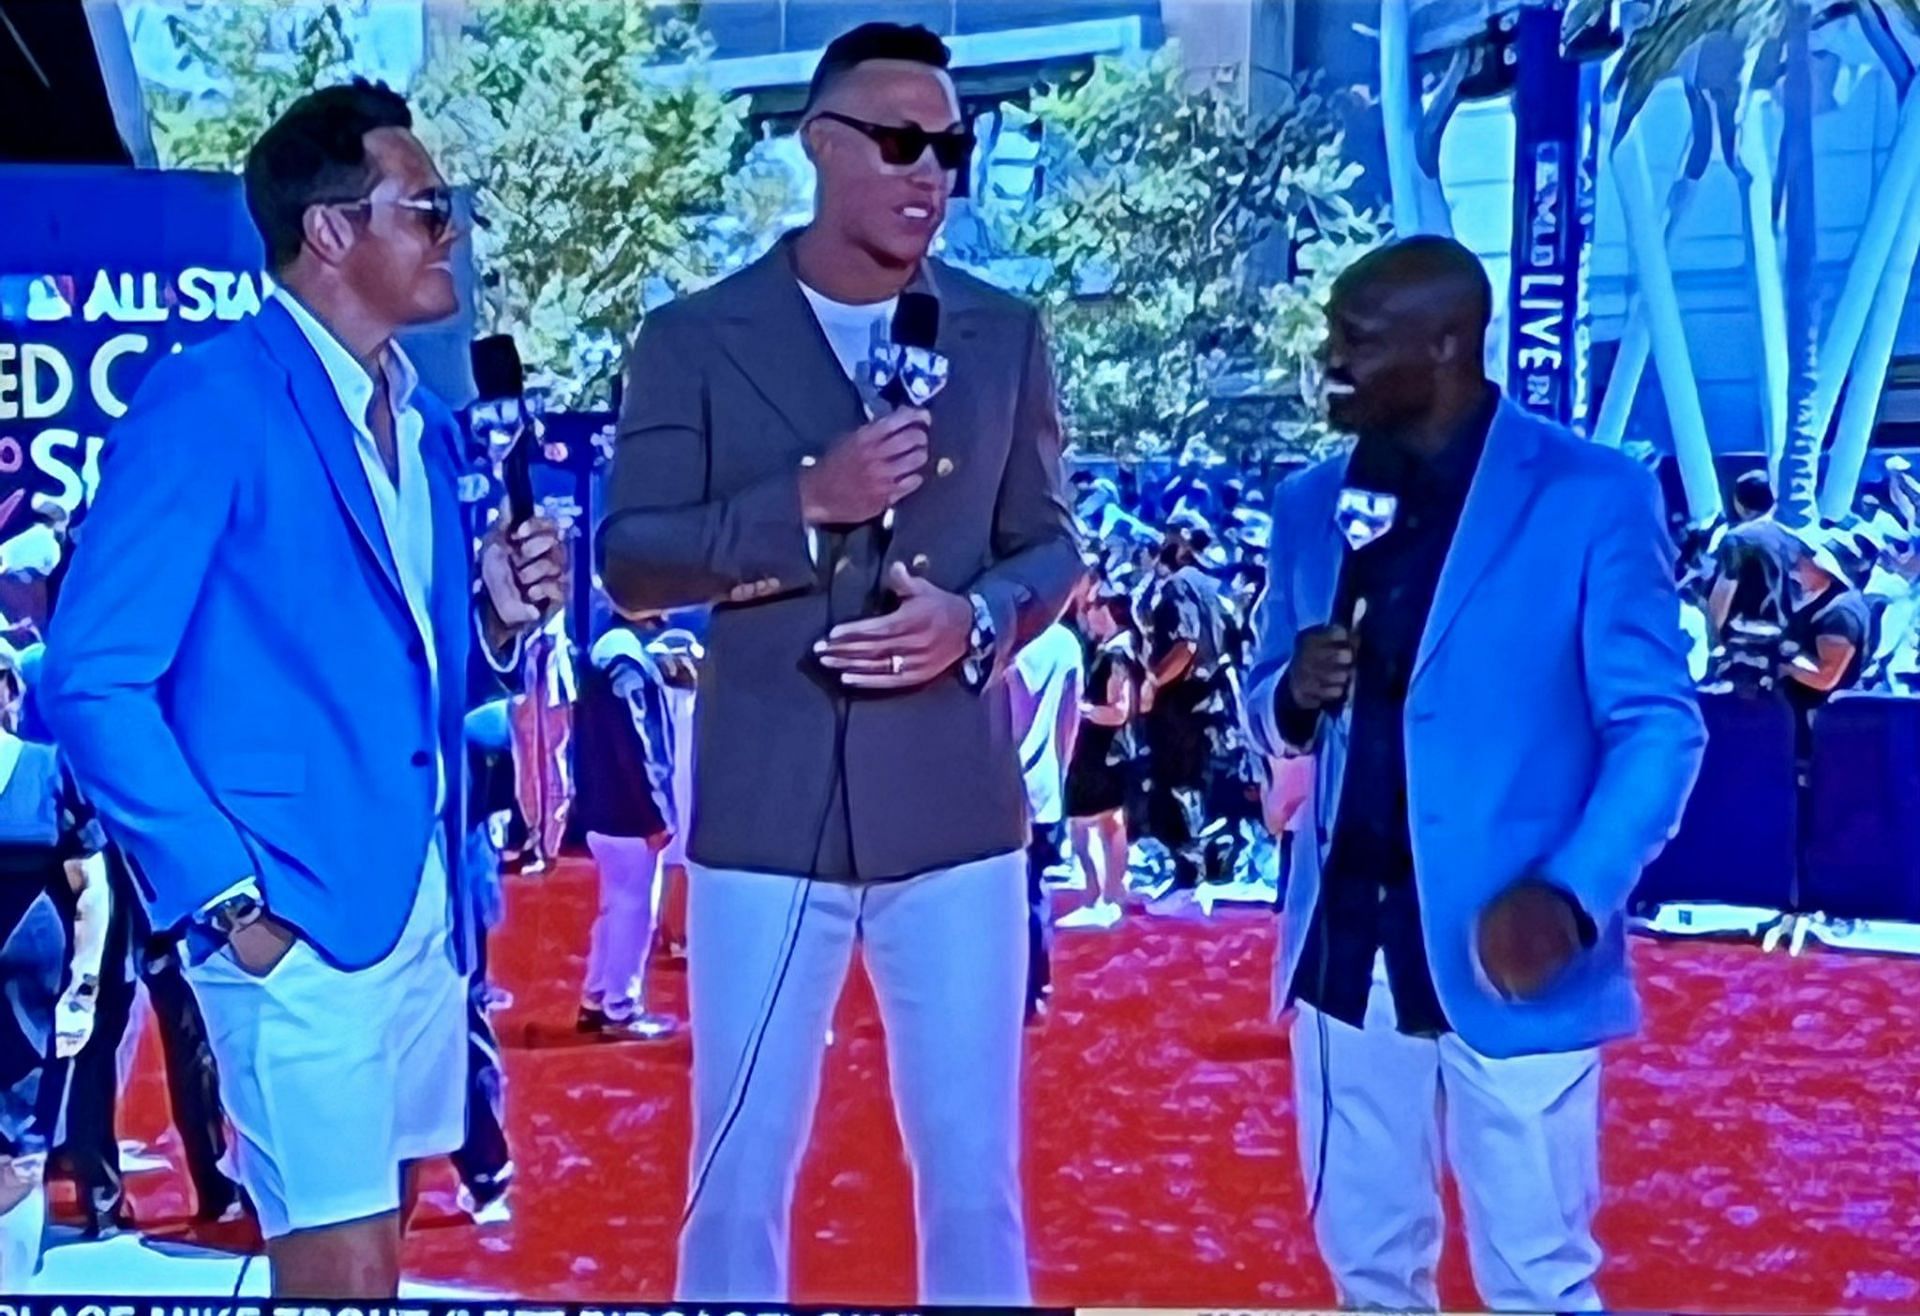 New York Yankees superstar Aaron Judge during the All-Star Game Red Carpet Show.